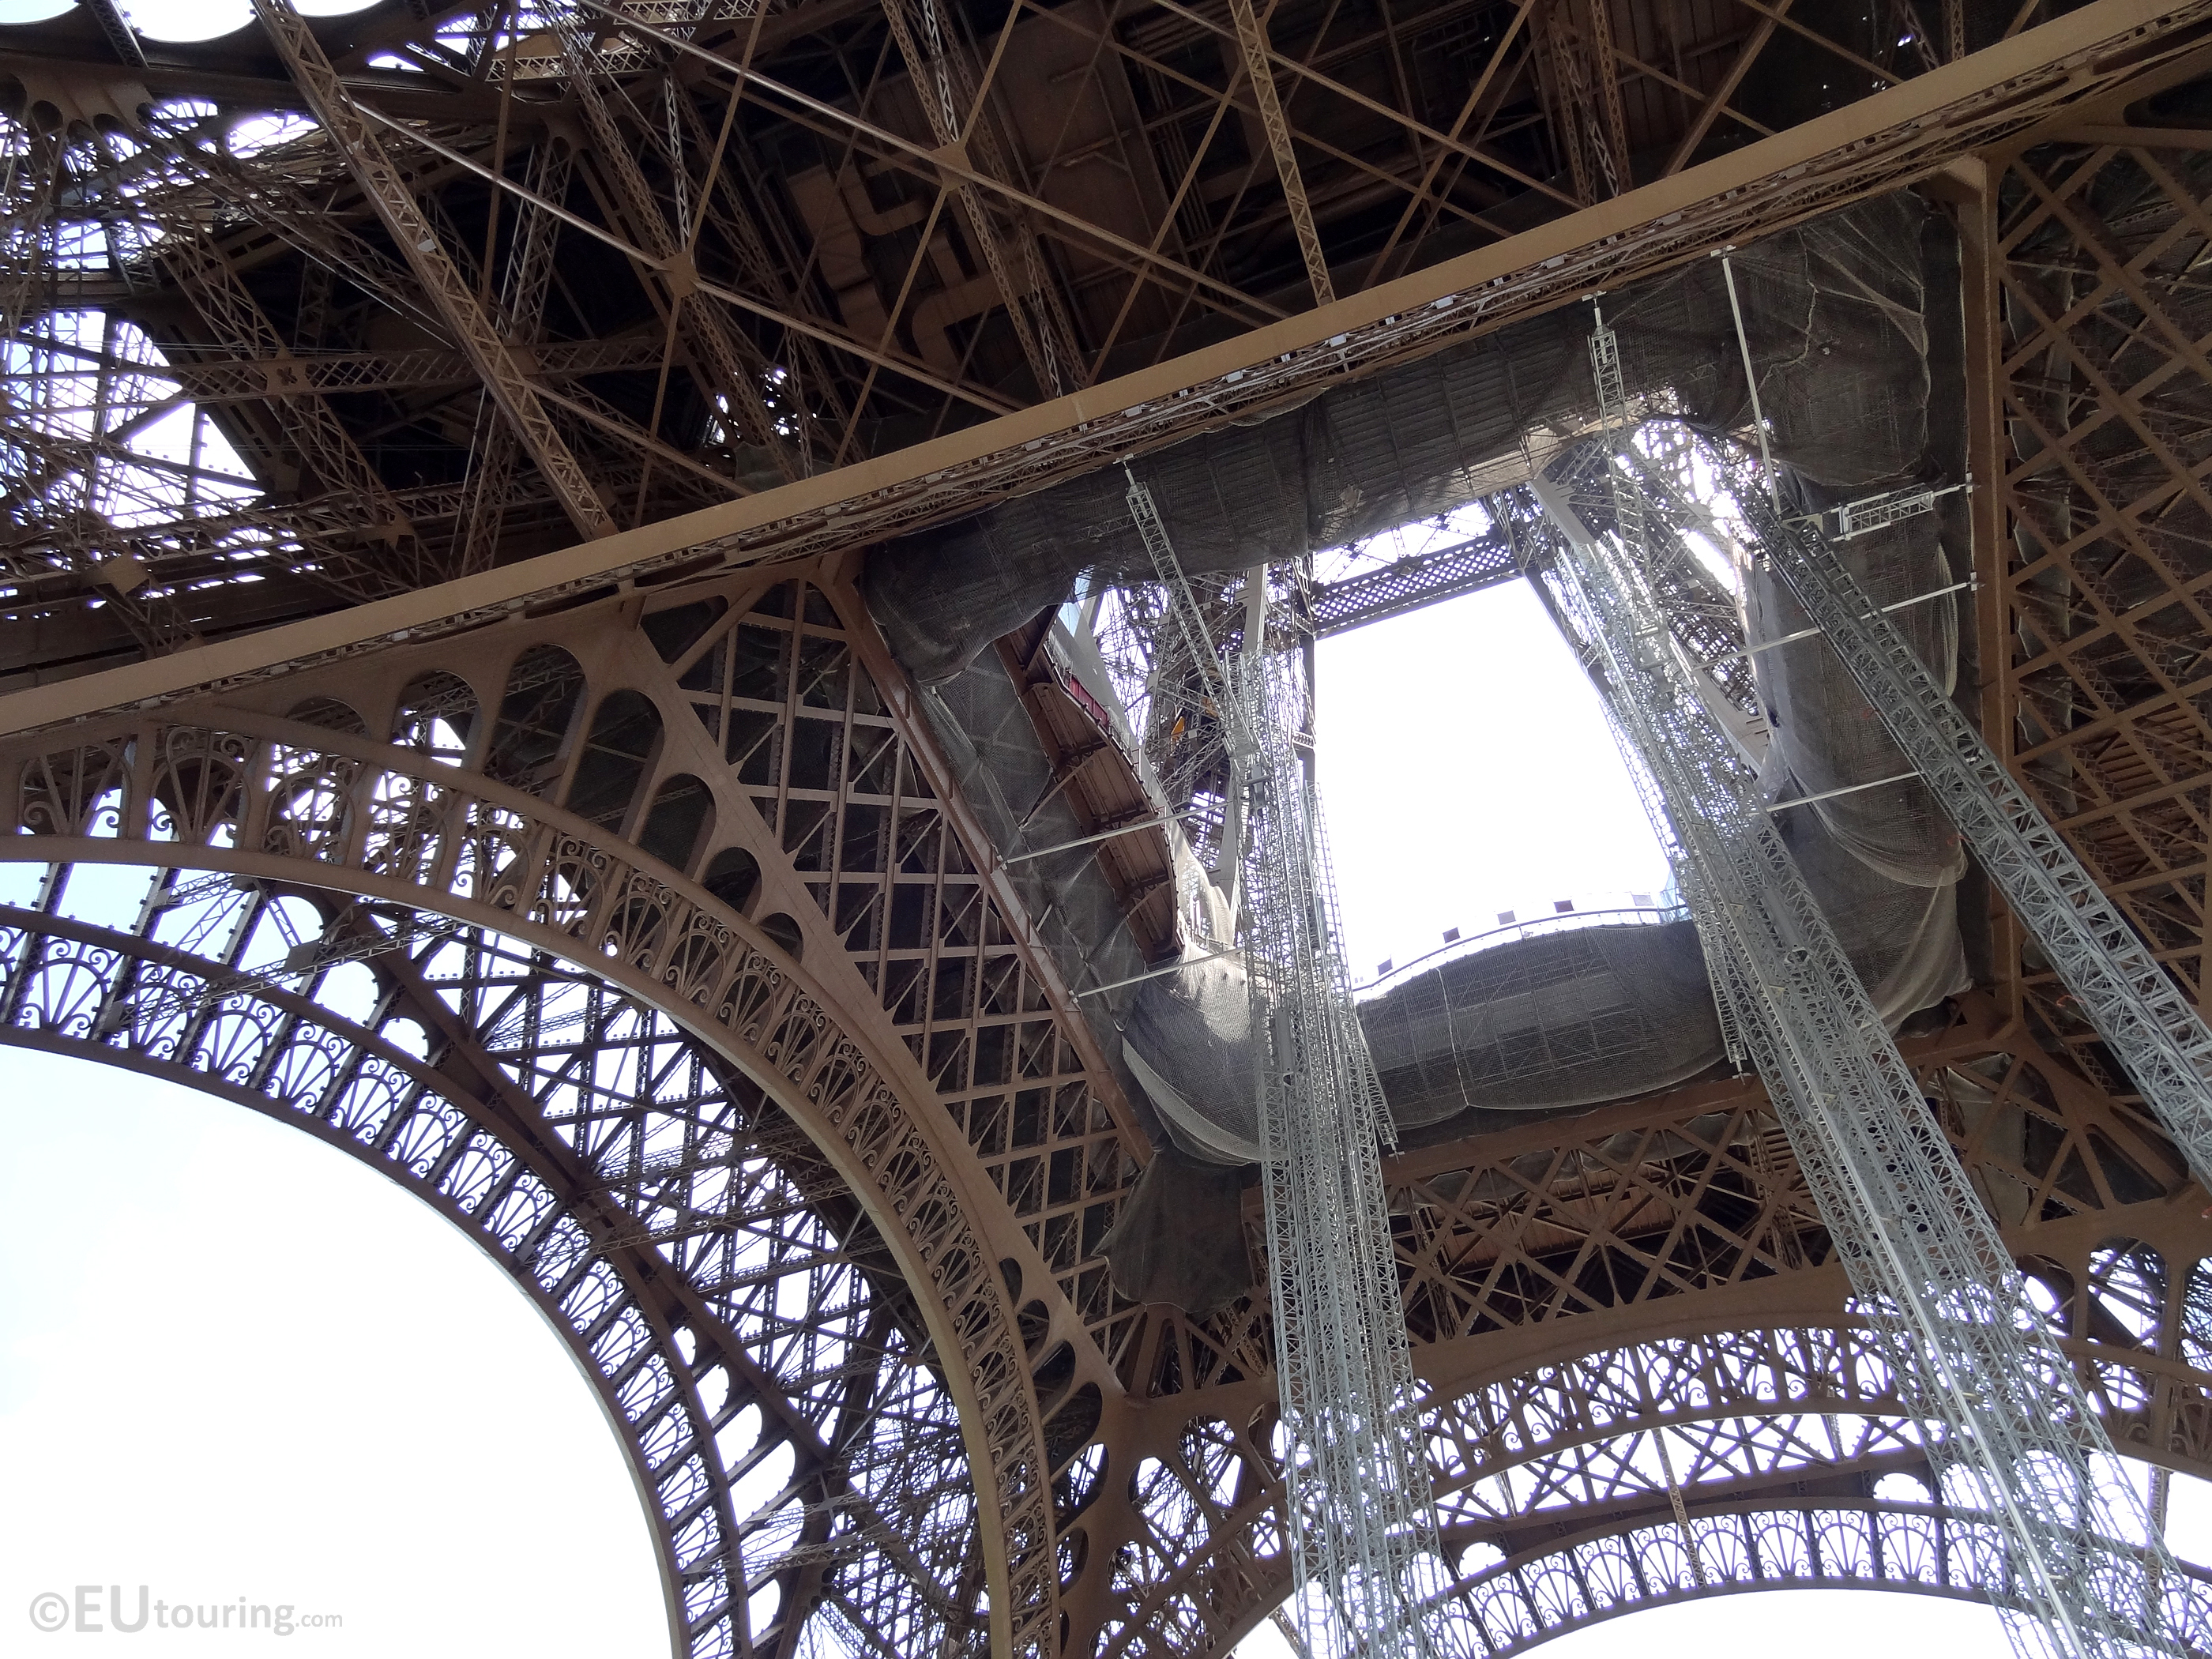 Iron work at the Eiffel Tower